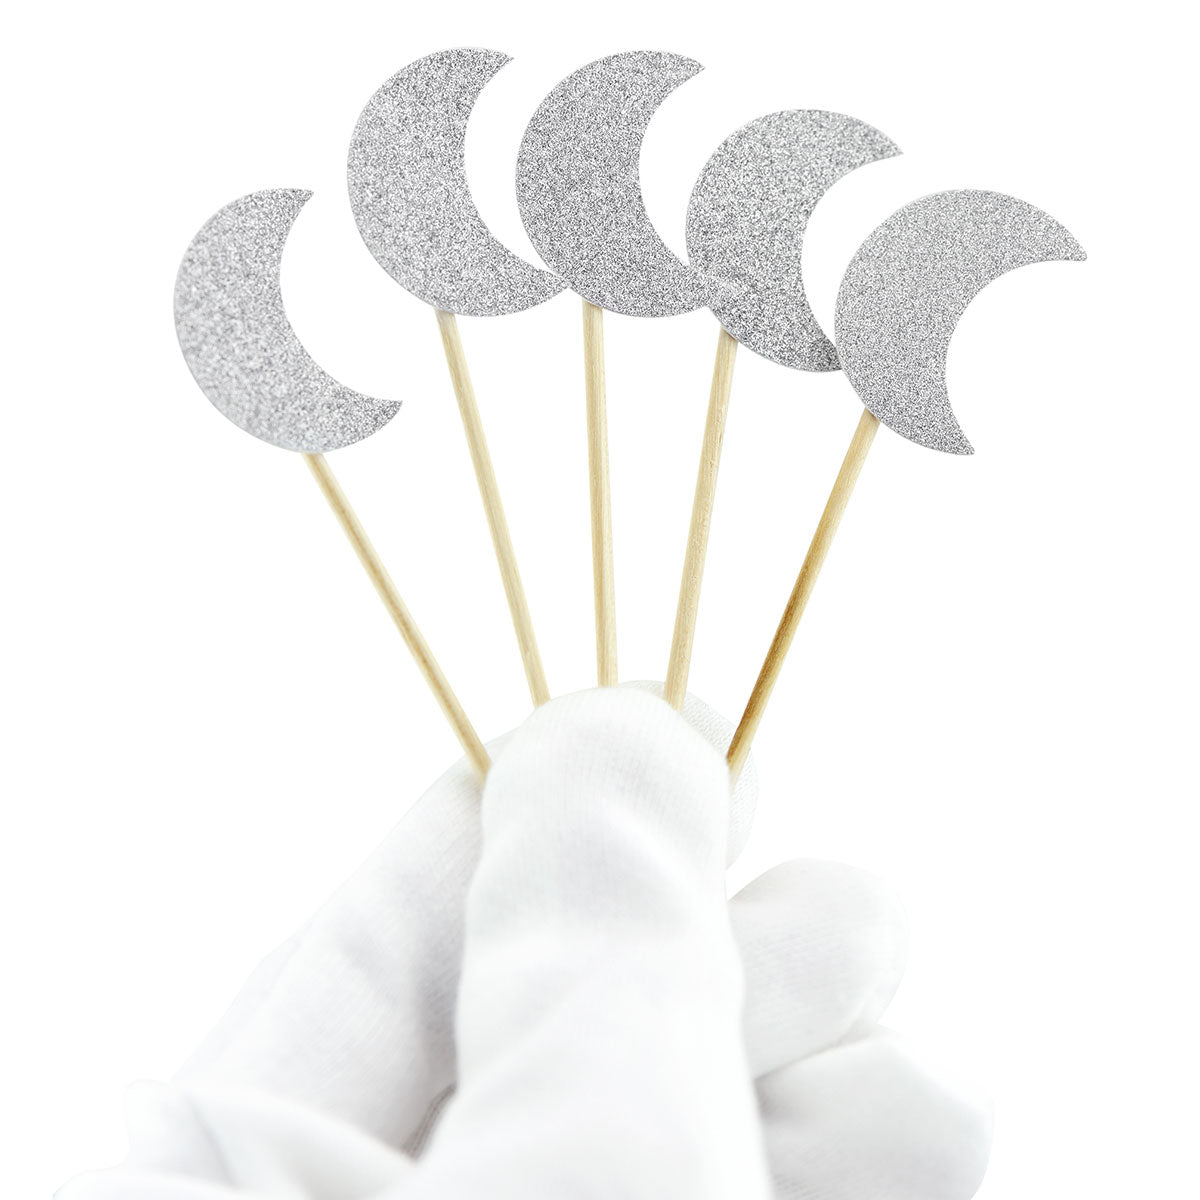 Silver Glitter Moon Cake Toppers 50 Pcs